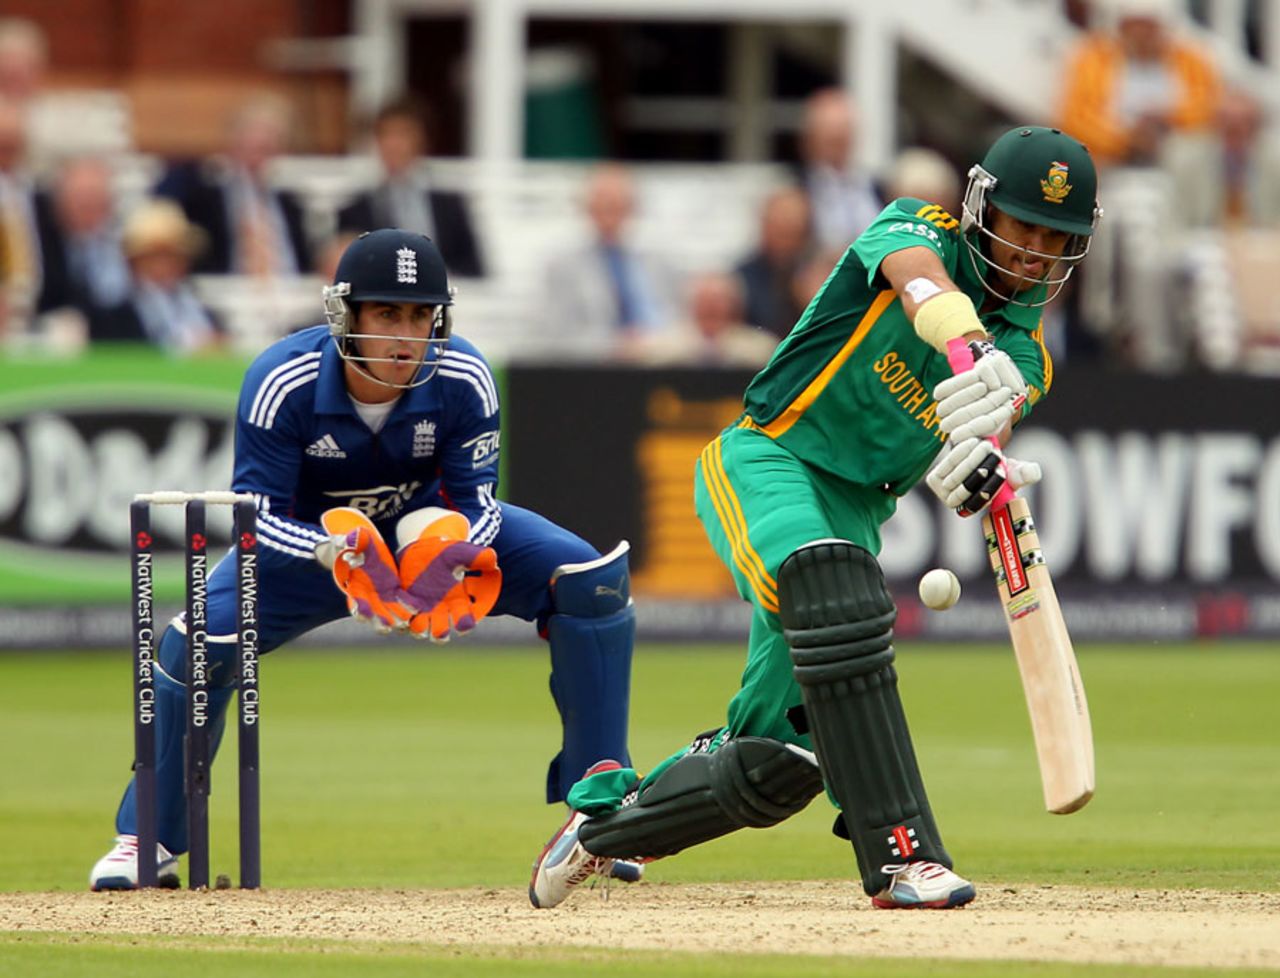 JP Duminy was lured out of his ground by James Tredwell to be stumped, England v South Africa, 4th ODI, Lord's, September 2, 2012